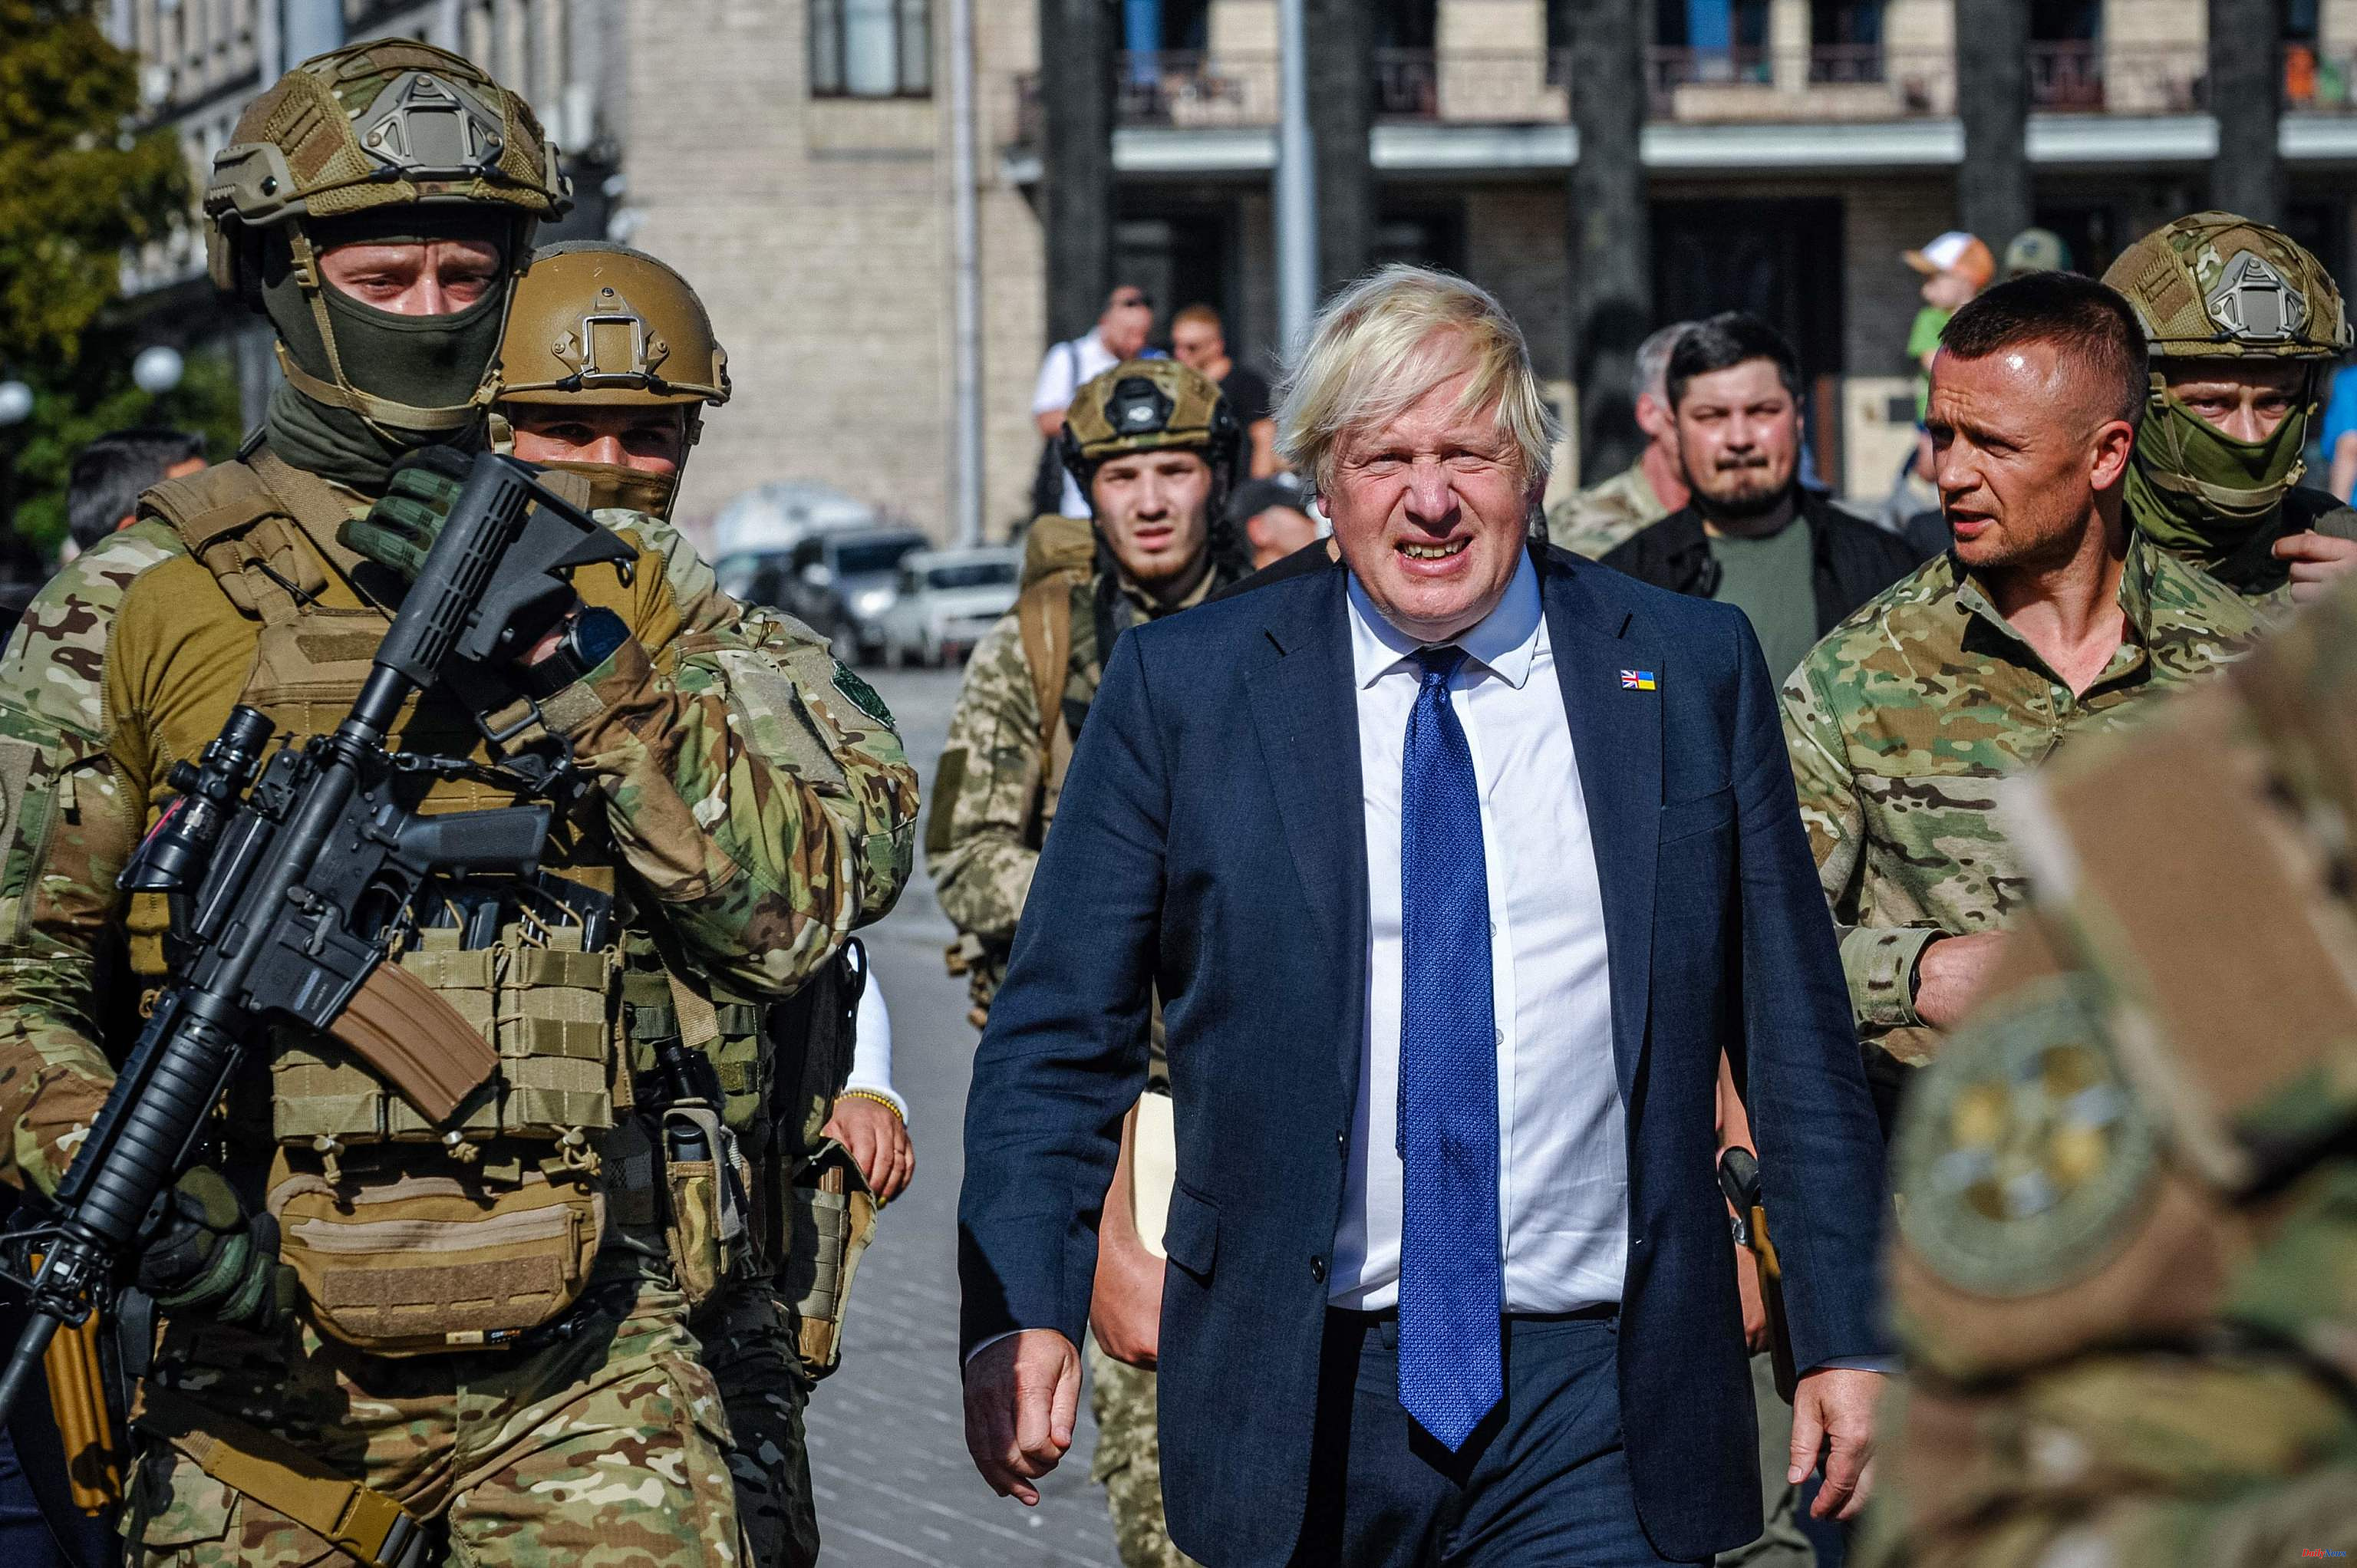 War in Ukraine Boris Johnson reveals his conversation with Putin: "I don't want to hurt you, but with a missile it would take a minute"